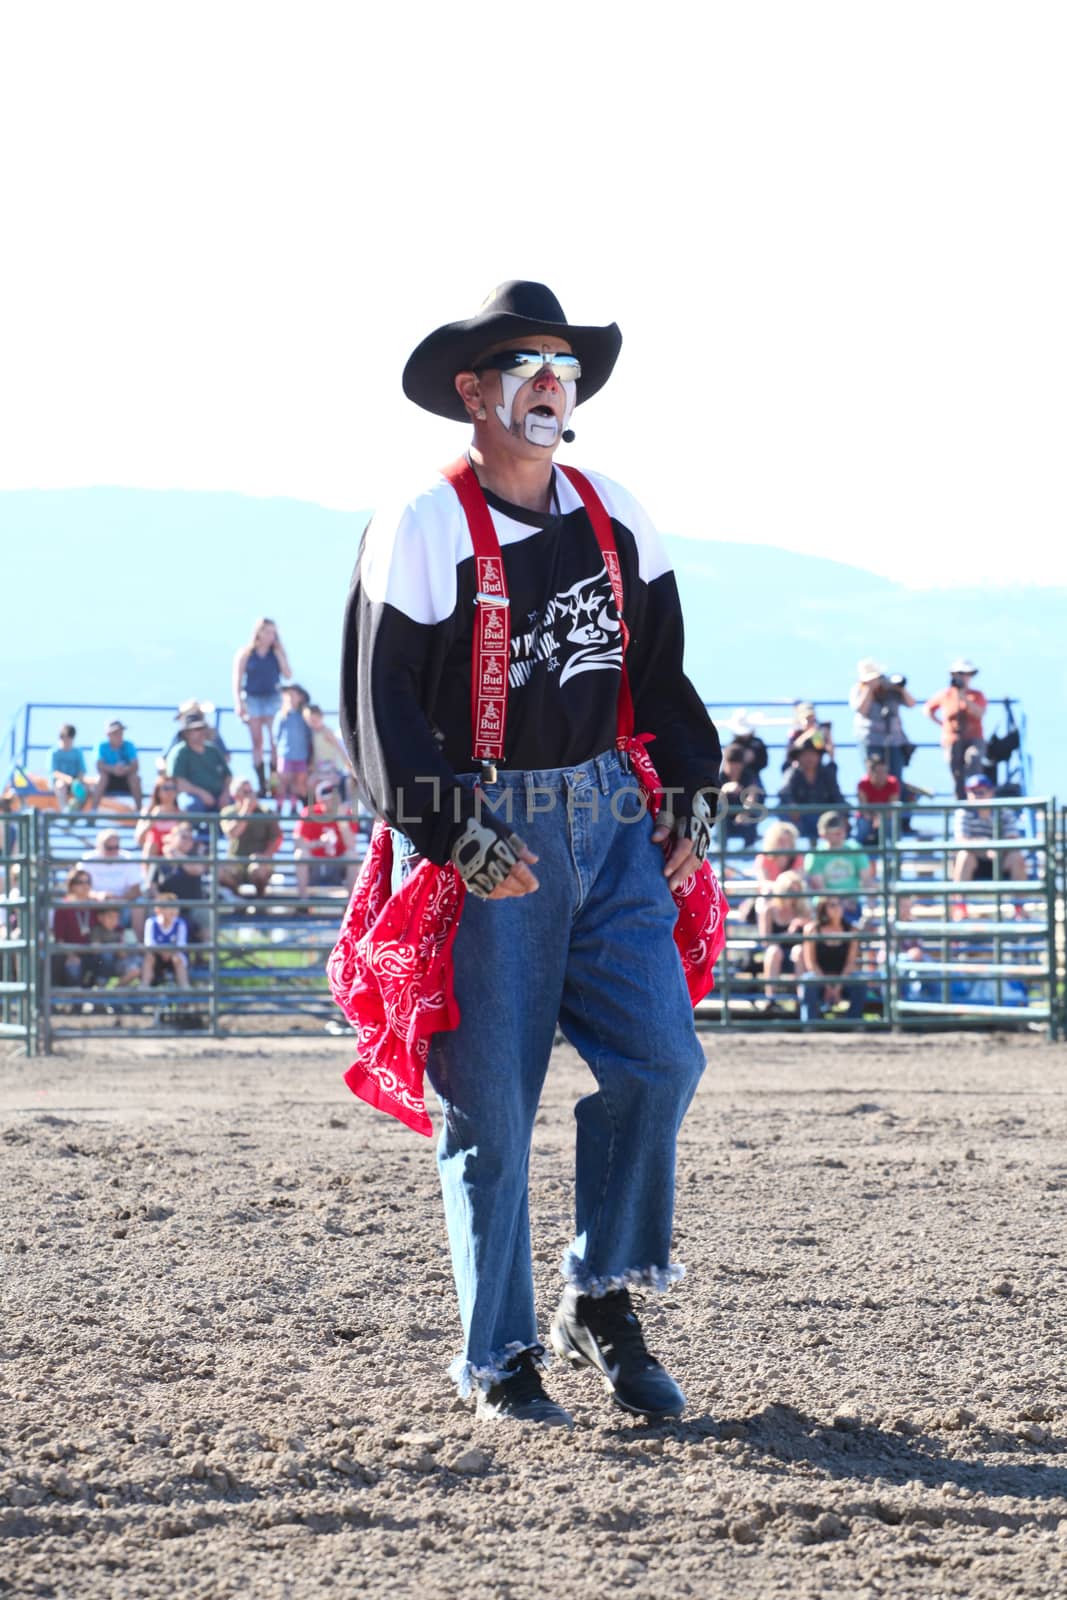 MERRITT, B.C. CANADA - May 30, 2015: Rodeo Clown during the first round of The 3nd Annual Ty Pozzobon Invitational PBR Event.